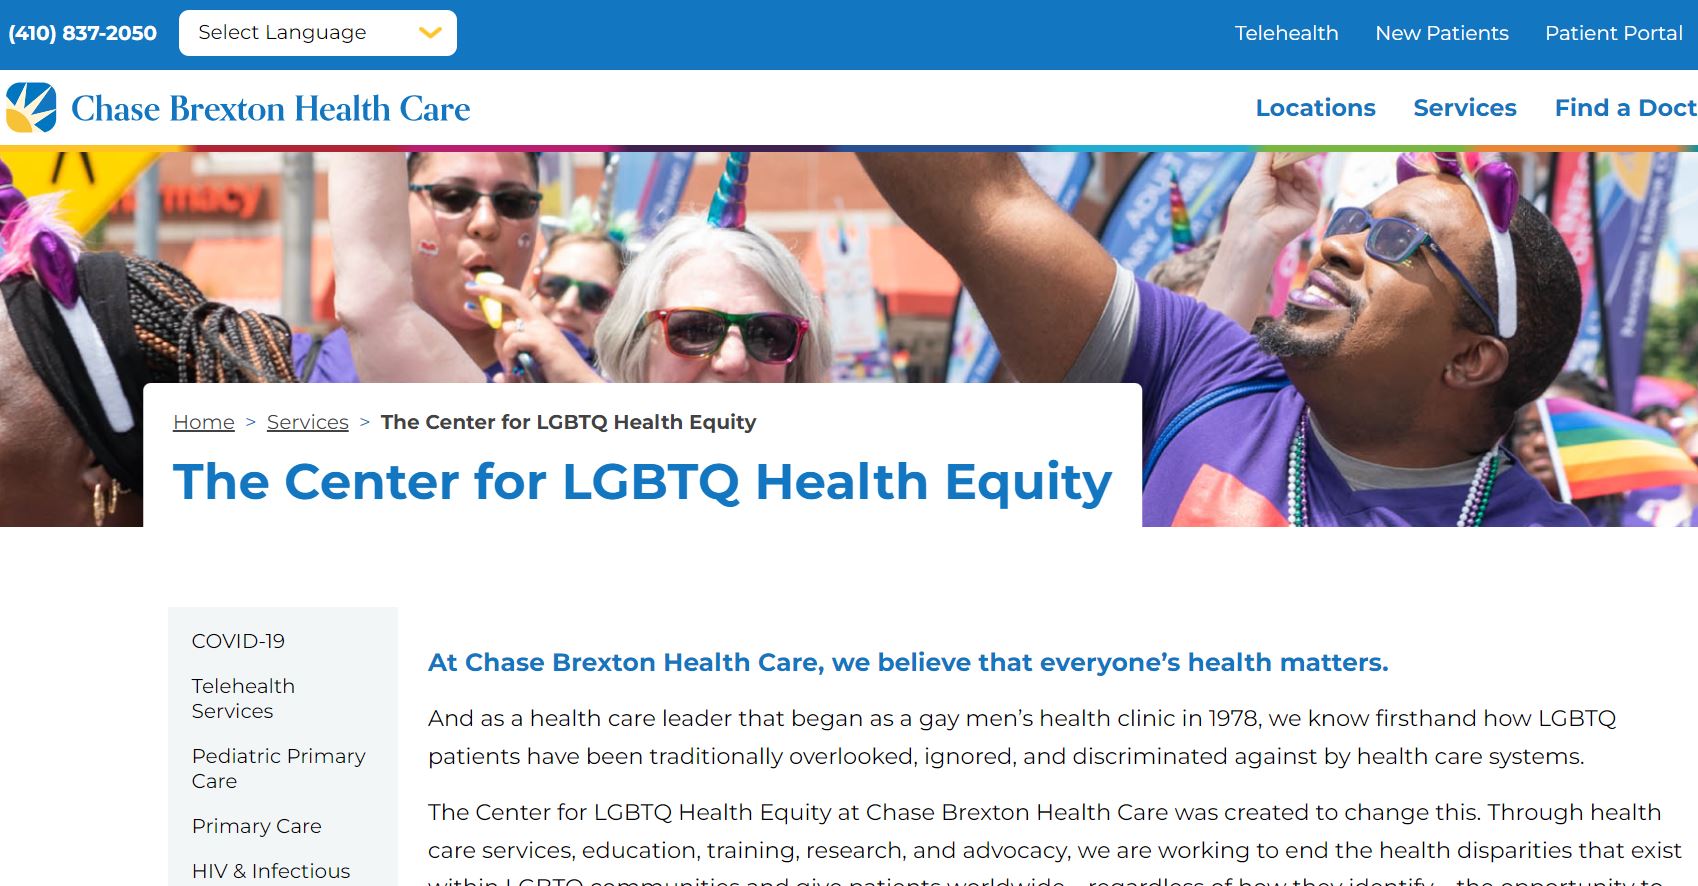 The Center for LGBTQ Health Equity of Chase Brexton Health Care